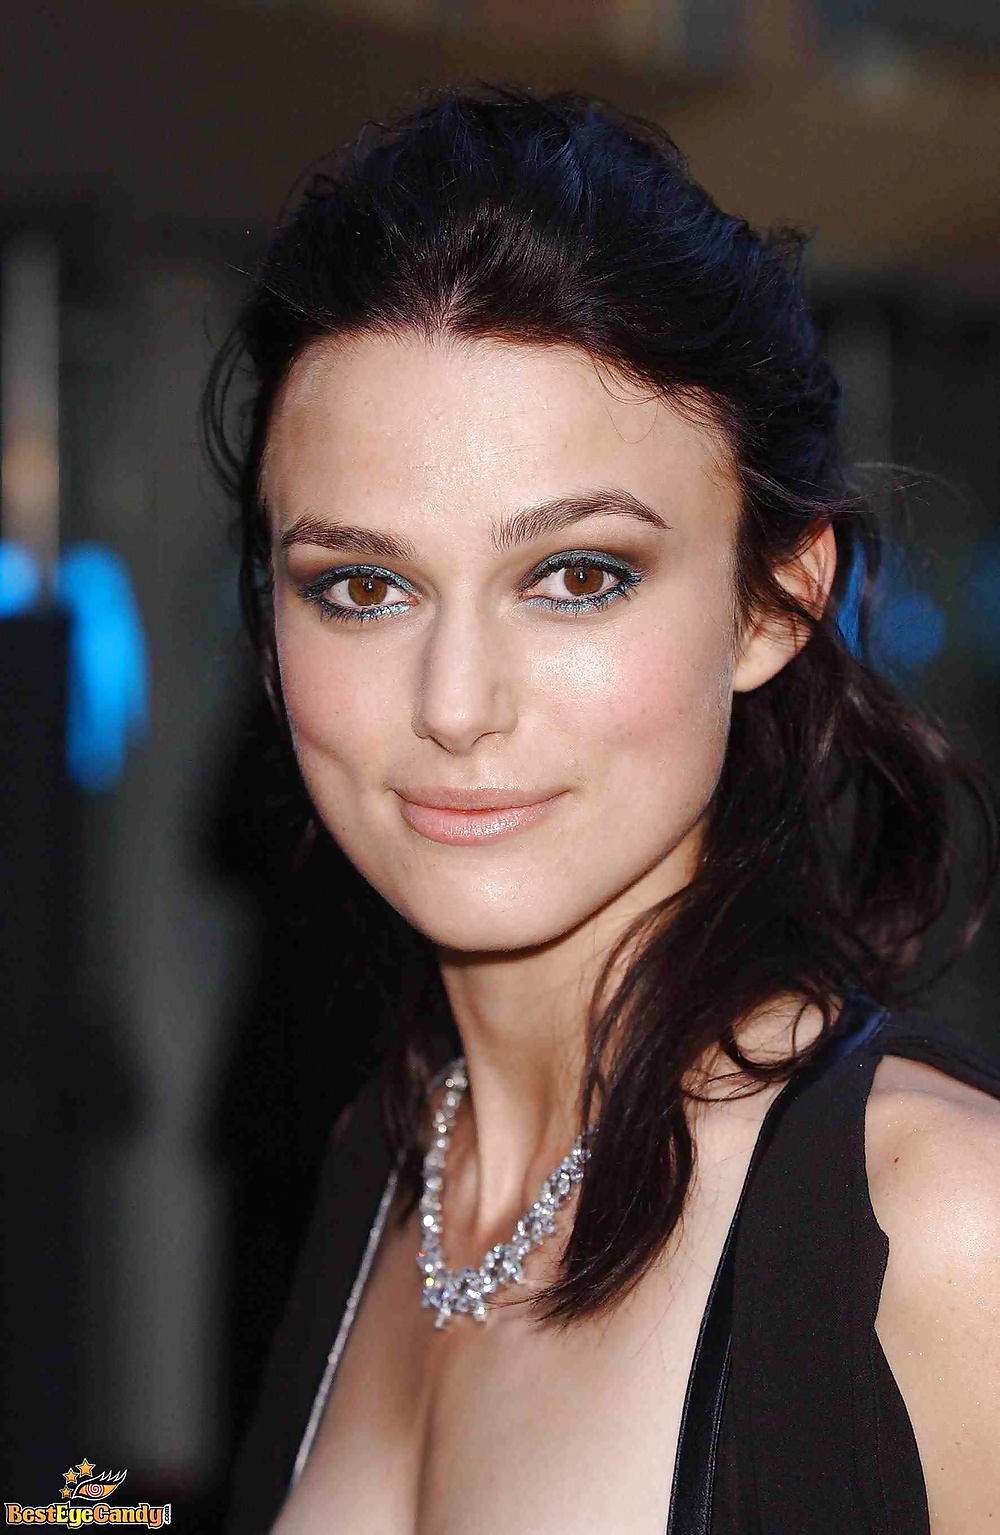 Keira Knightley The Royal Lady of England #35649619